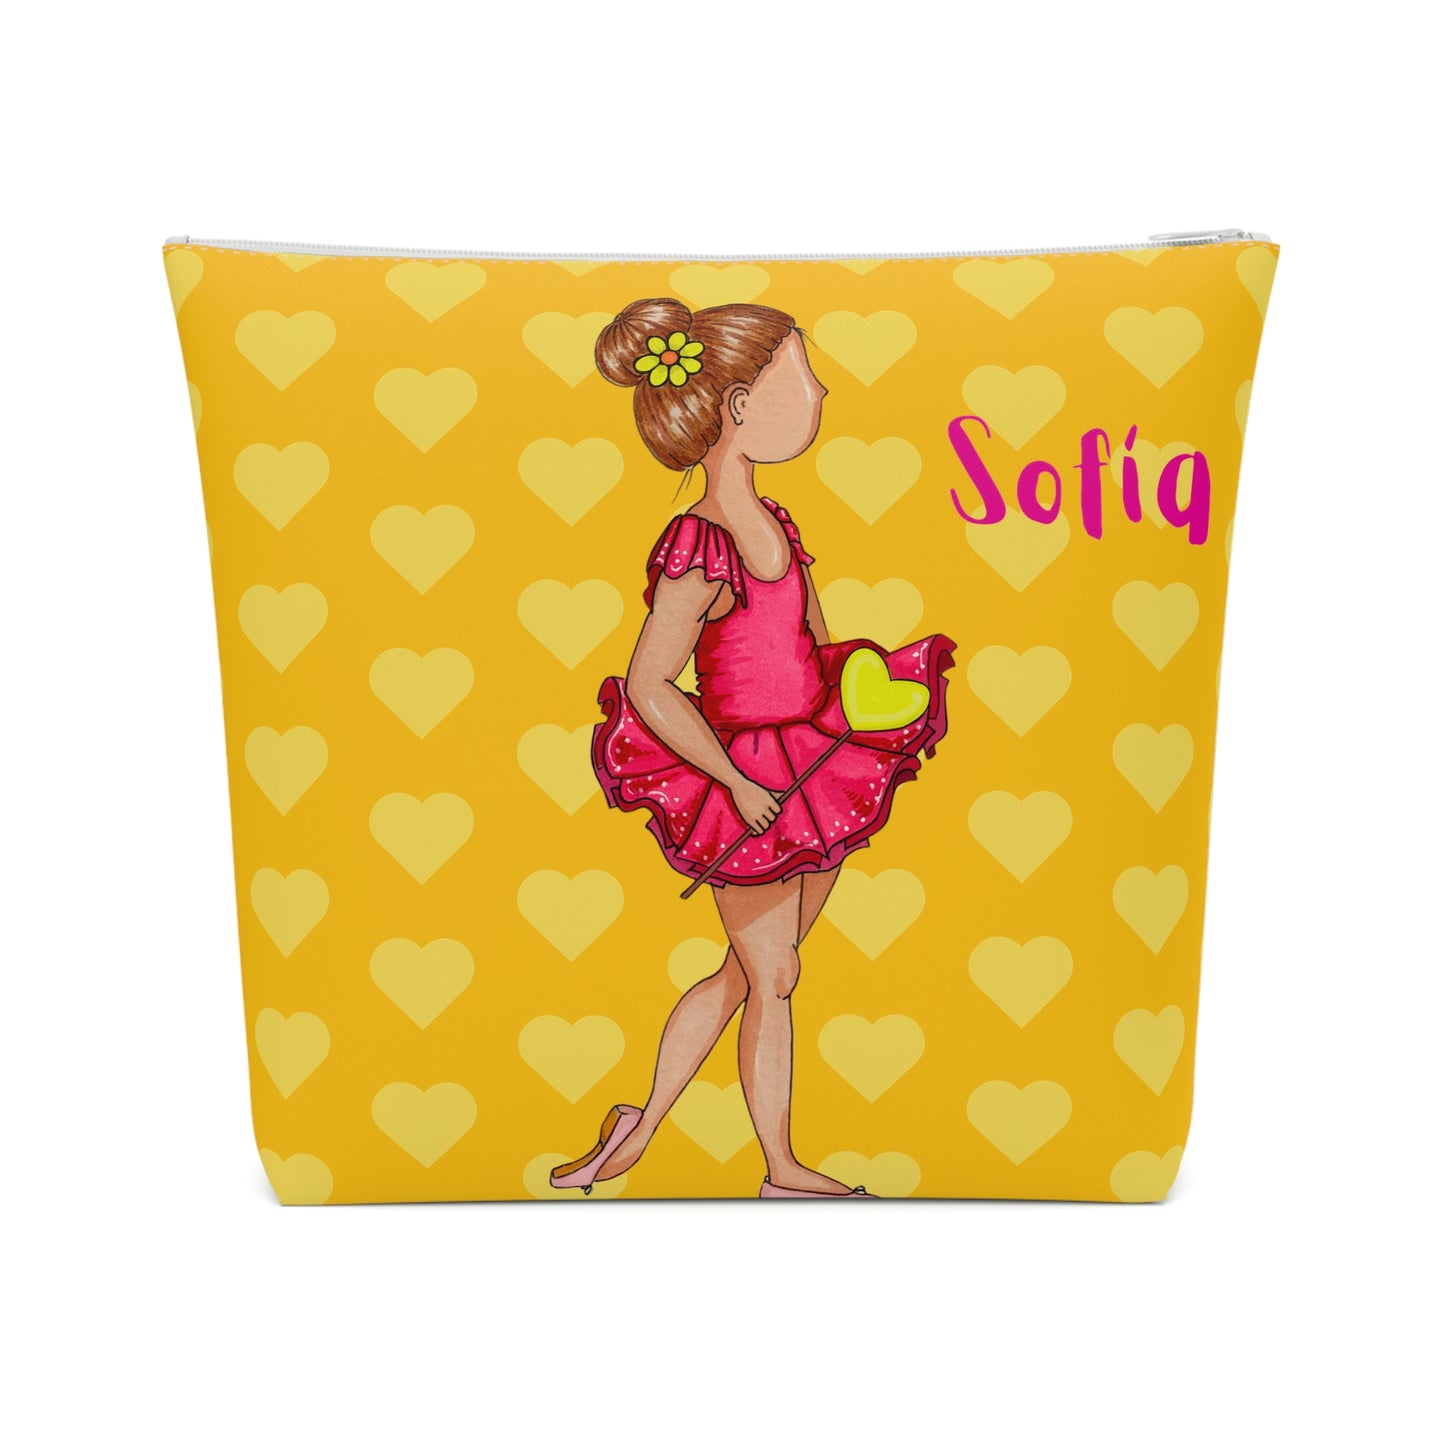 Ballerina Dancer Customizable all purpose cotton bag, yellow background with hearts and a ballerina in a pink dress.